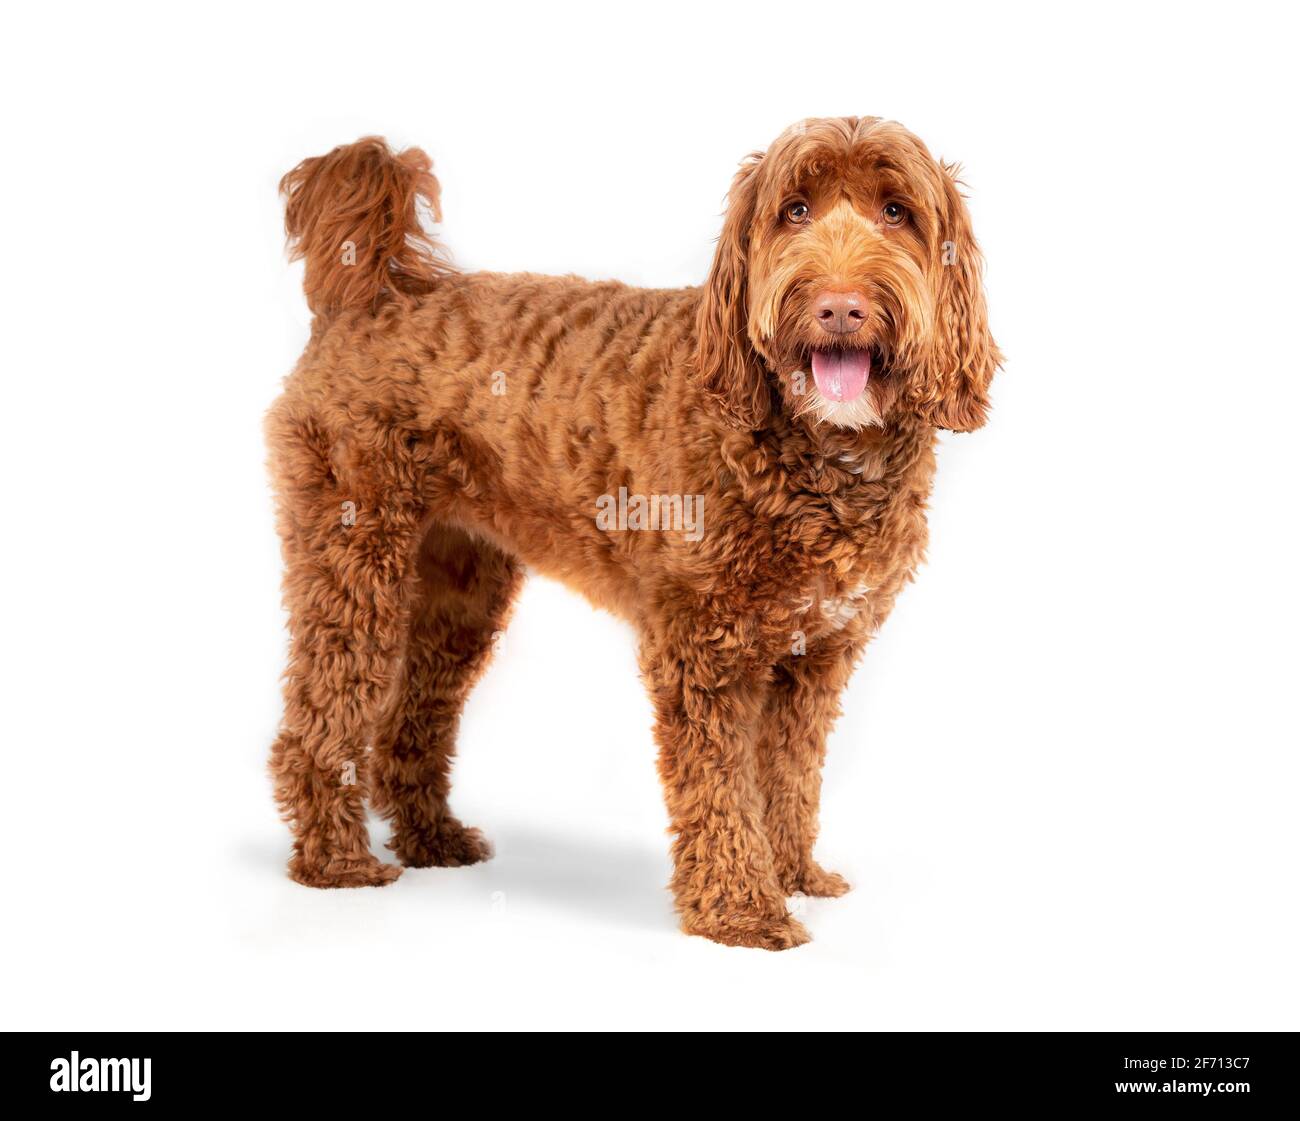 Isolated Labradoodle dog standing sideways with mouth open and tongue out. Medium to large female adult dog looking at camera. Happy or excited dog. Stock Photo